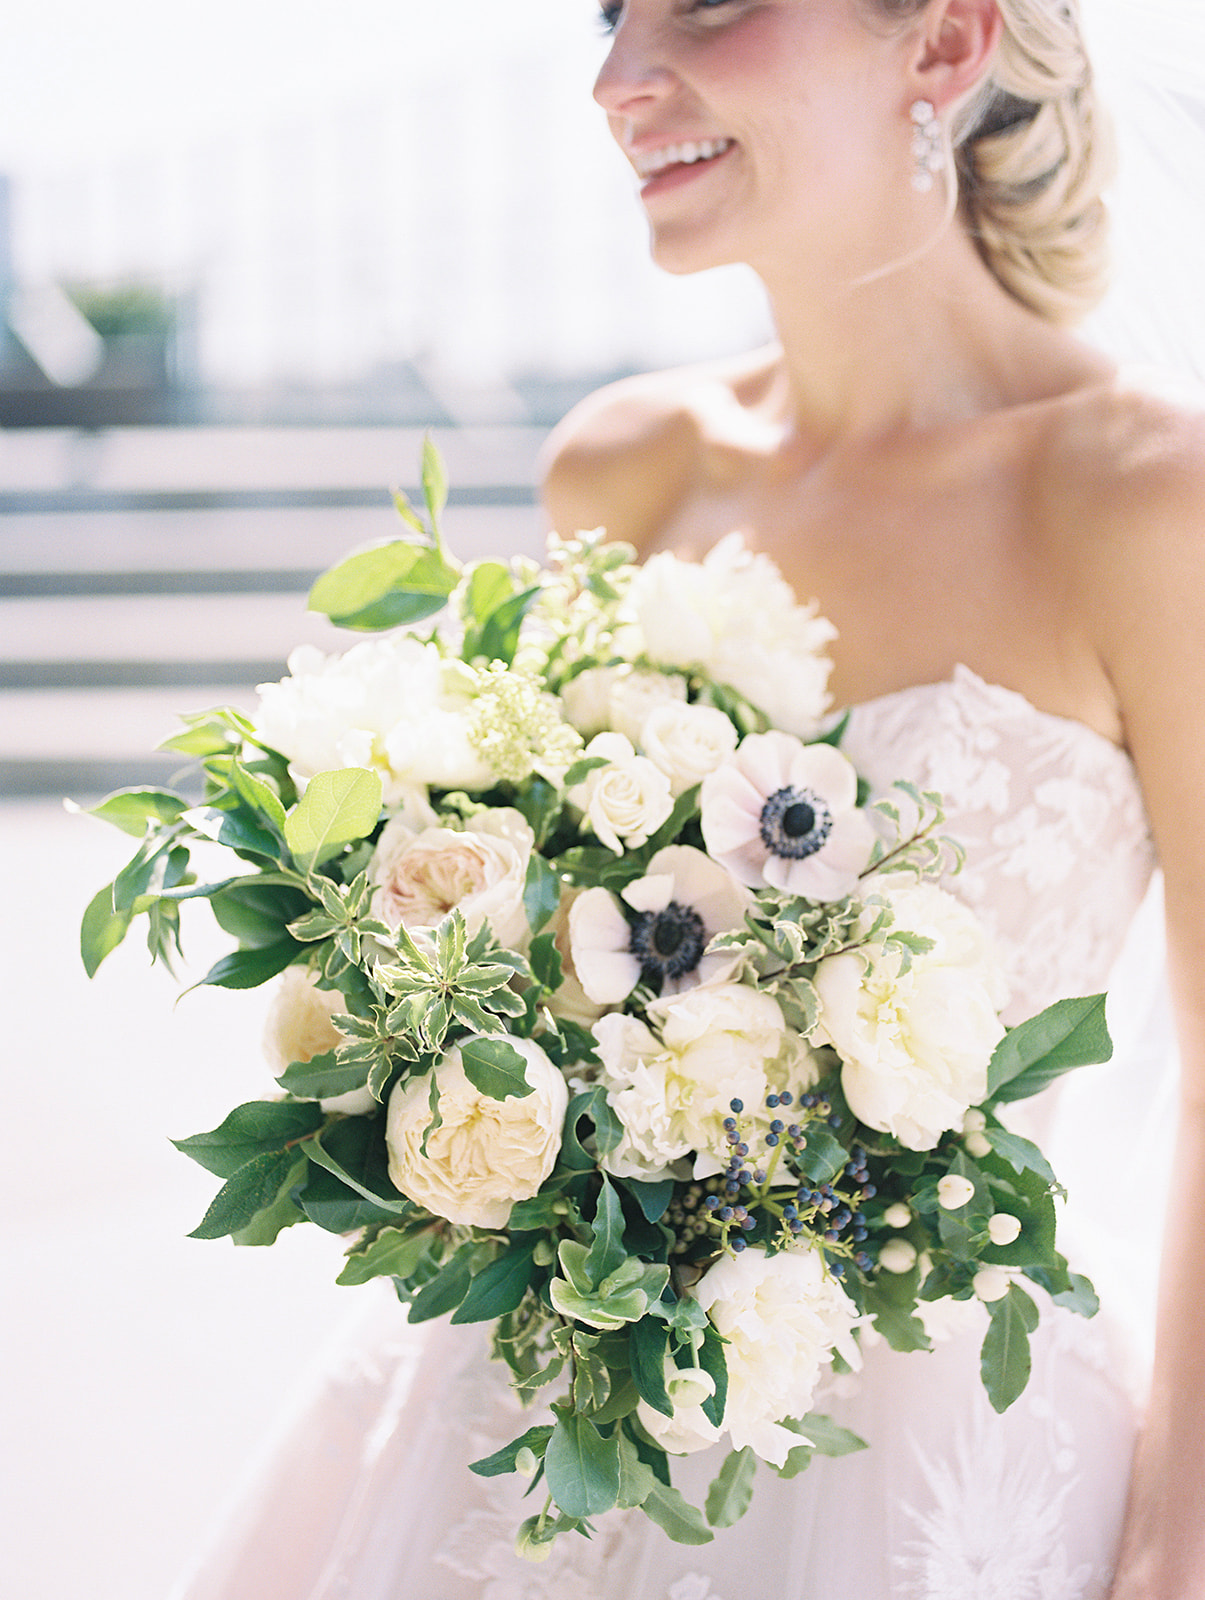 lush bridal bouquet with cream and white blooms for Secret Urban Garden Wedding at Philadelphia’s Fitler Club